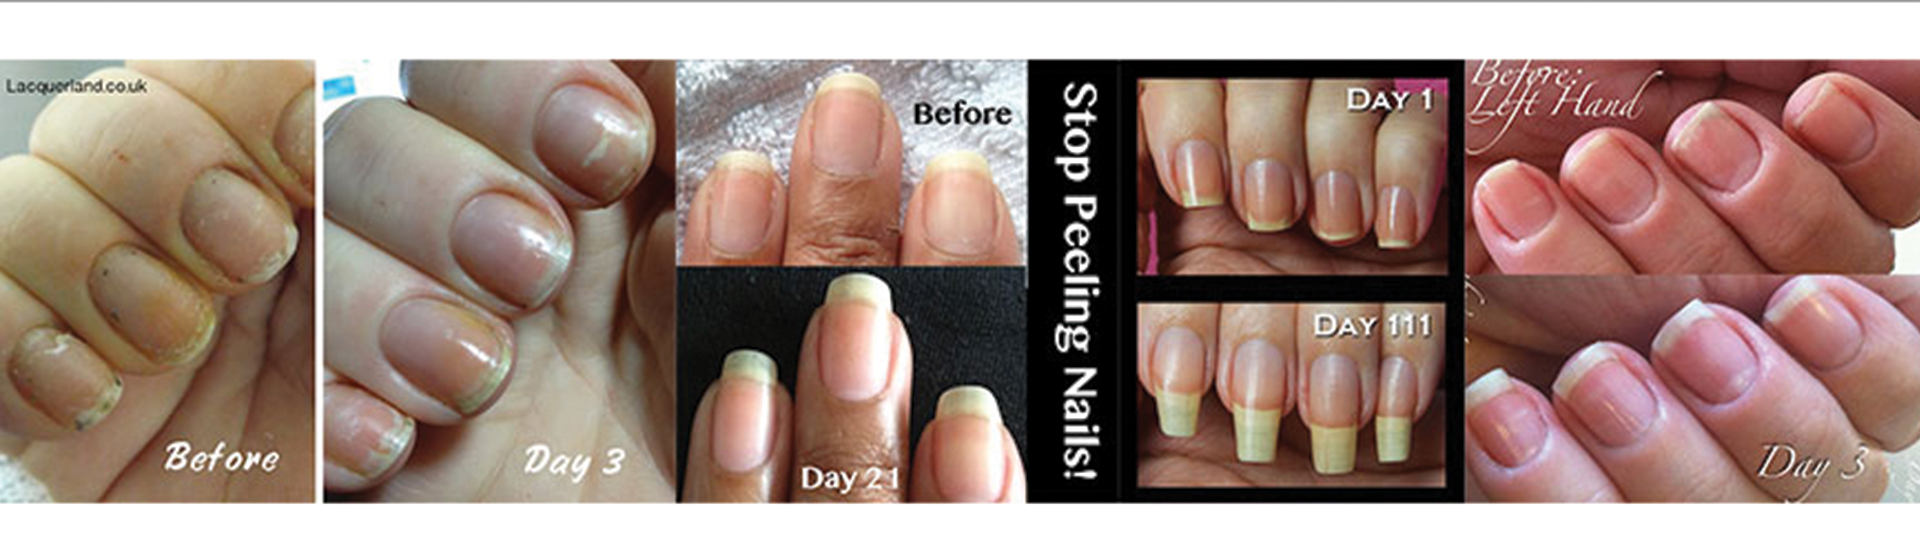 gnc-nails-before-and-after.png